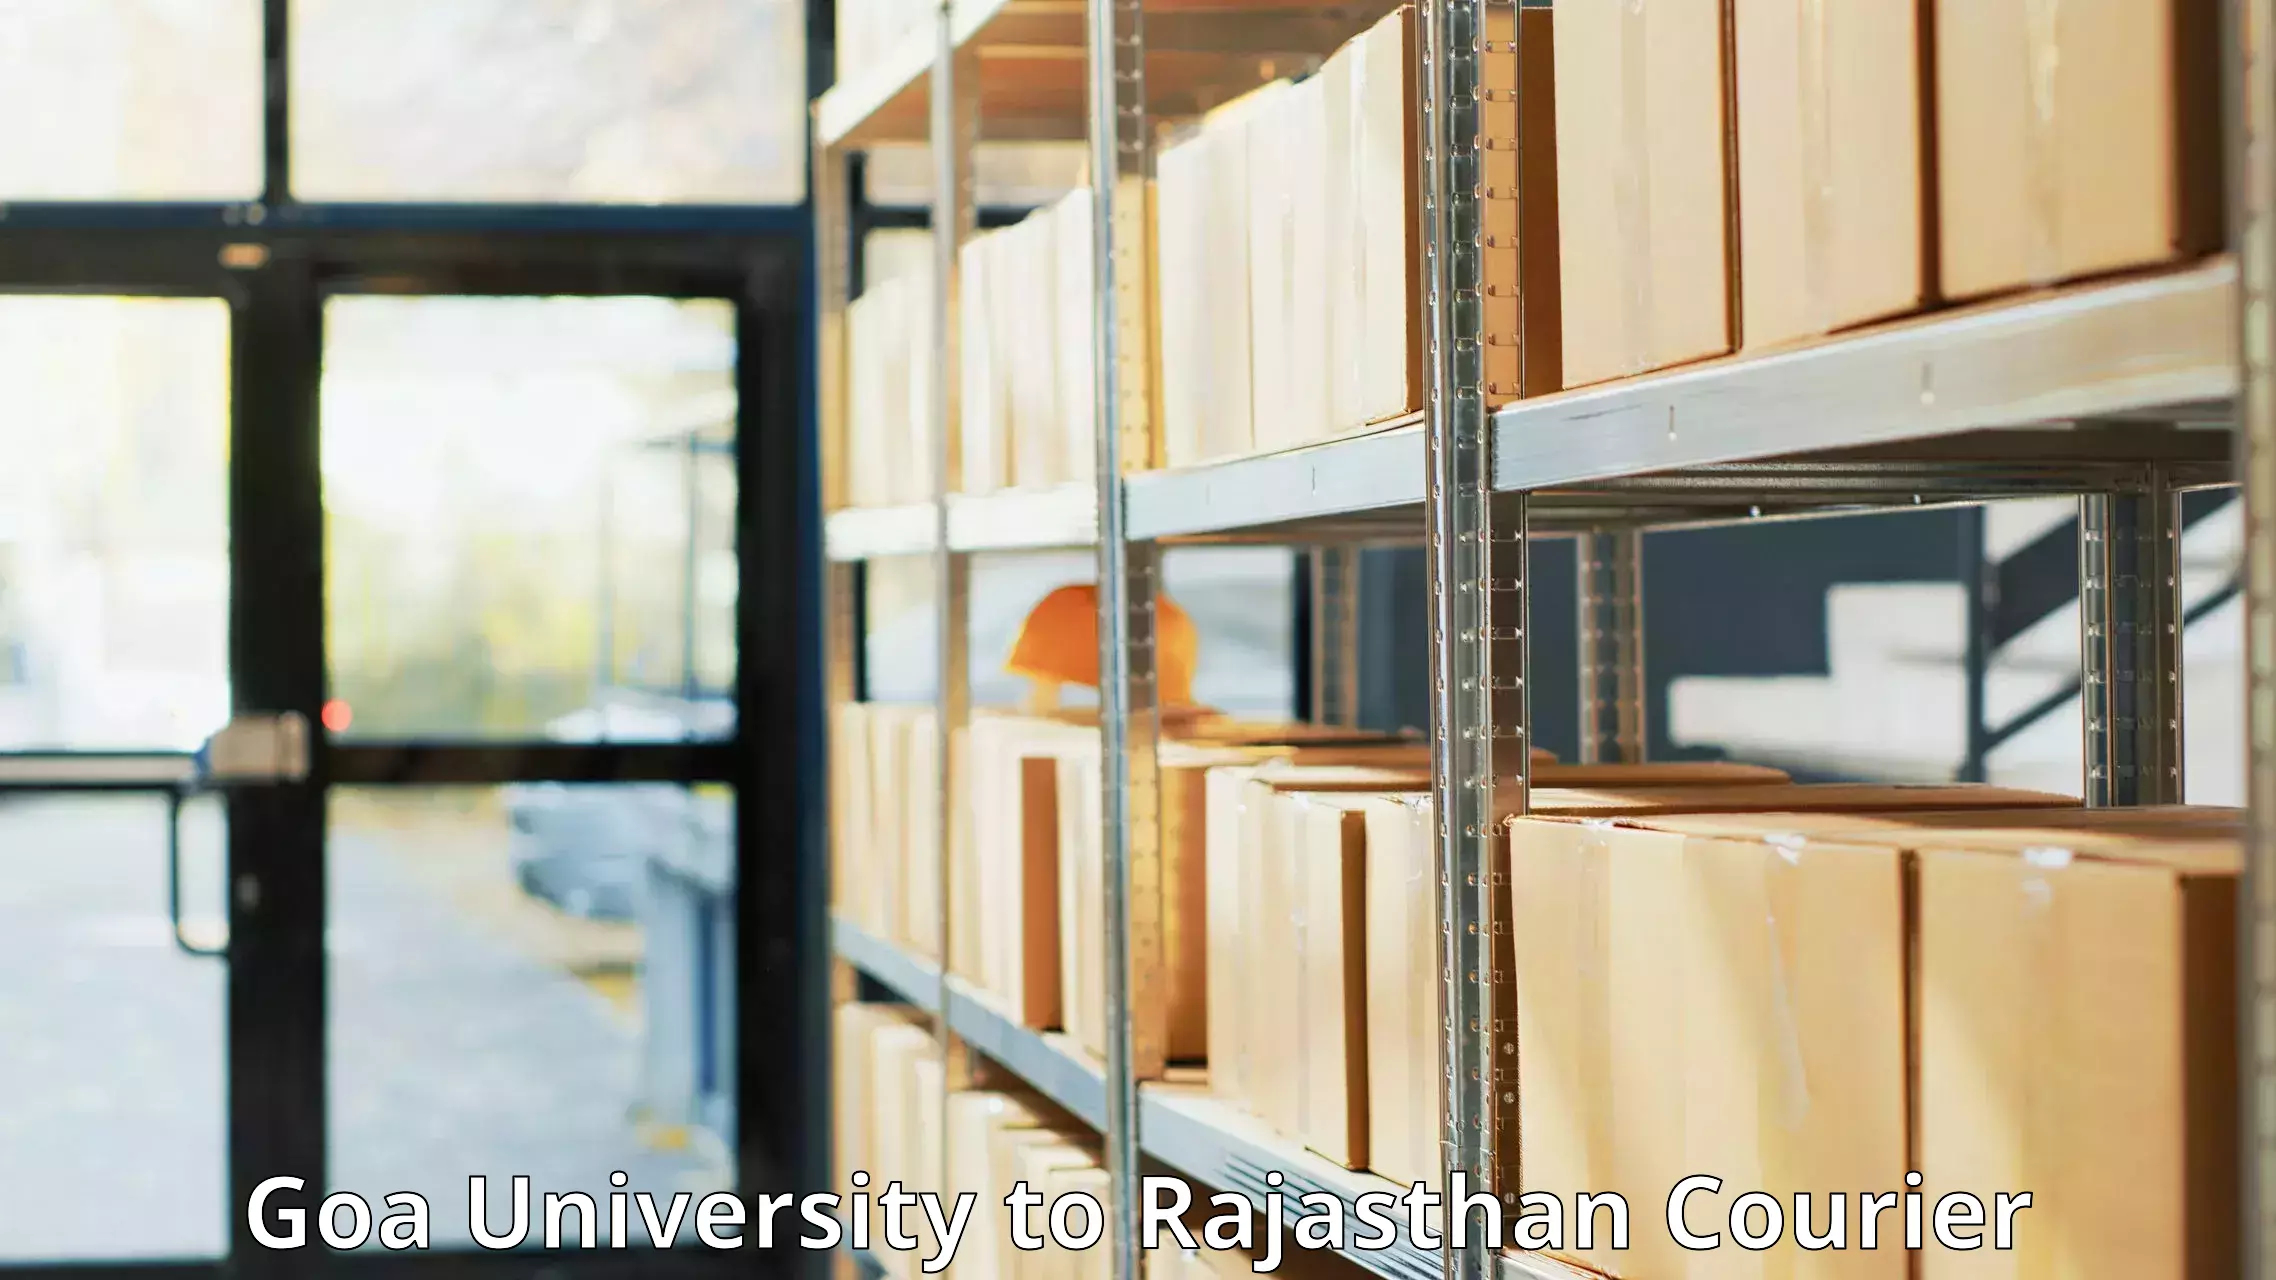 Nationwide courier service Goa University to Pali